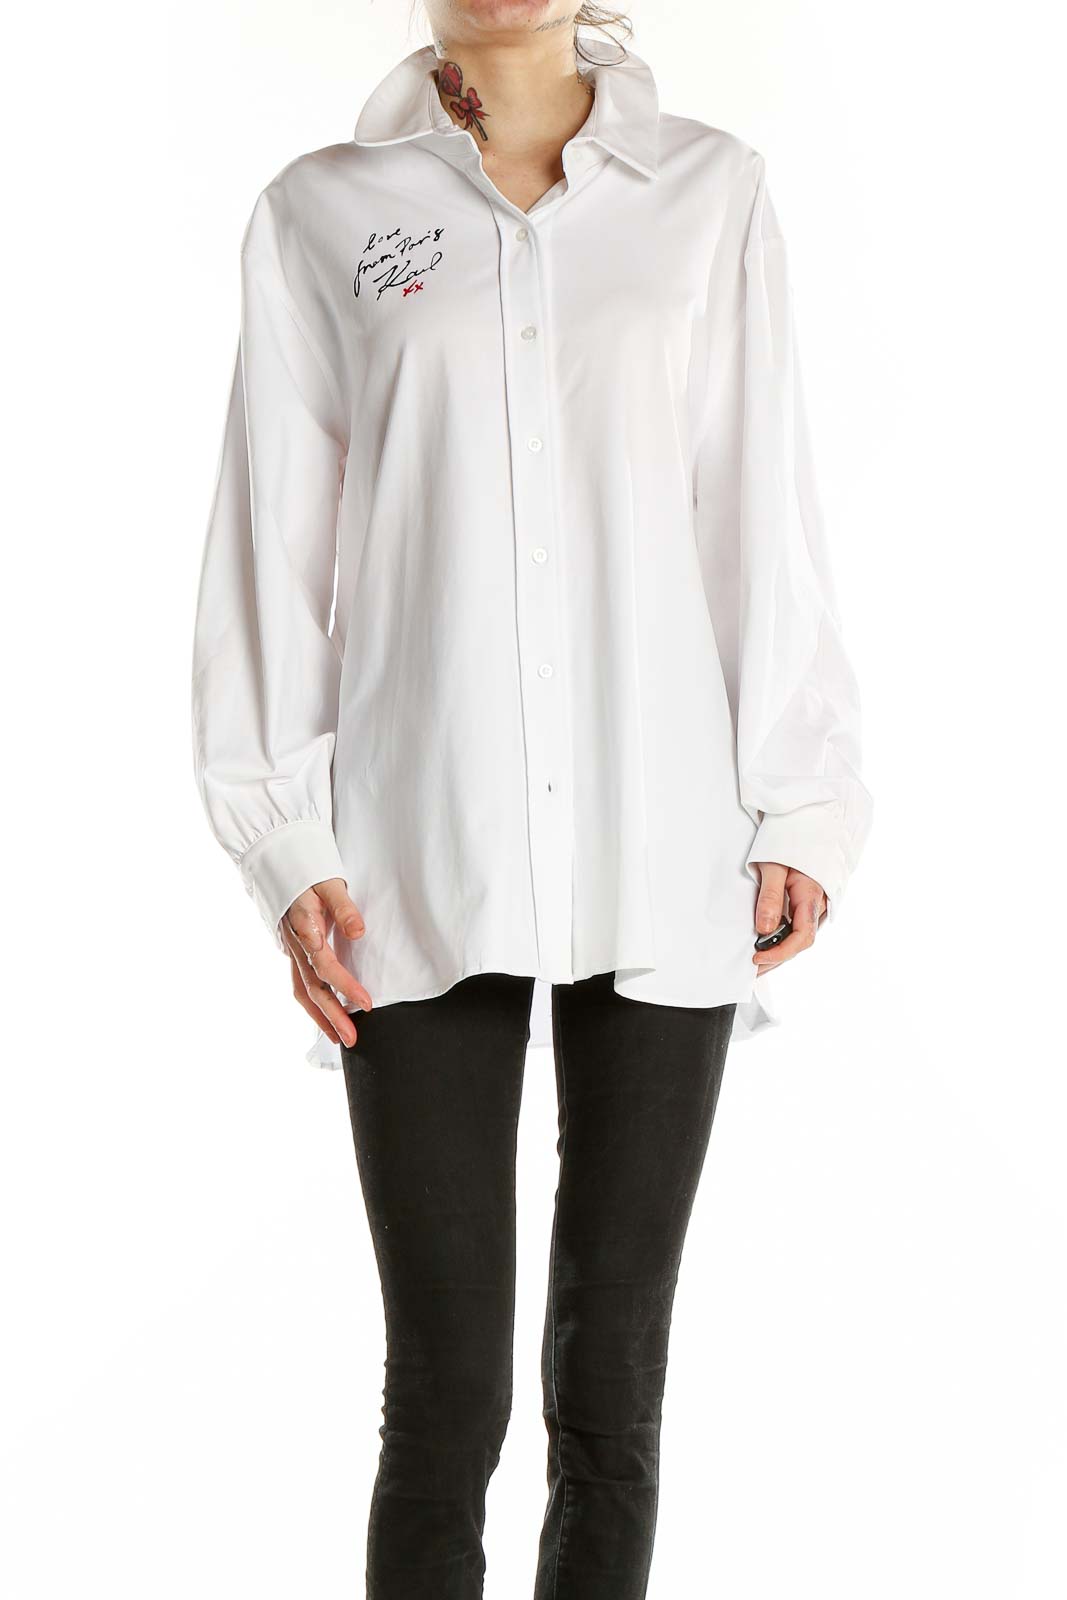 White Graphic Long Sleeve Shirt Front